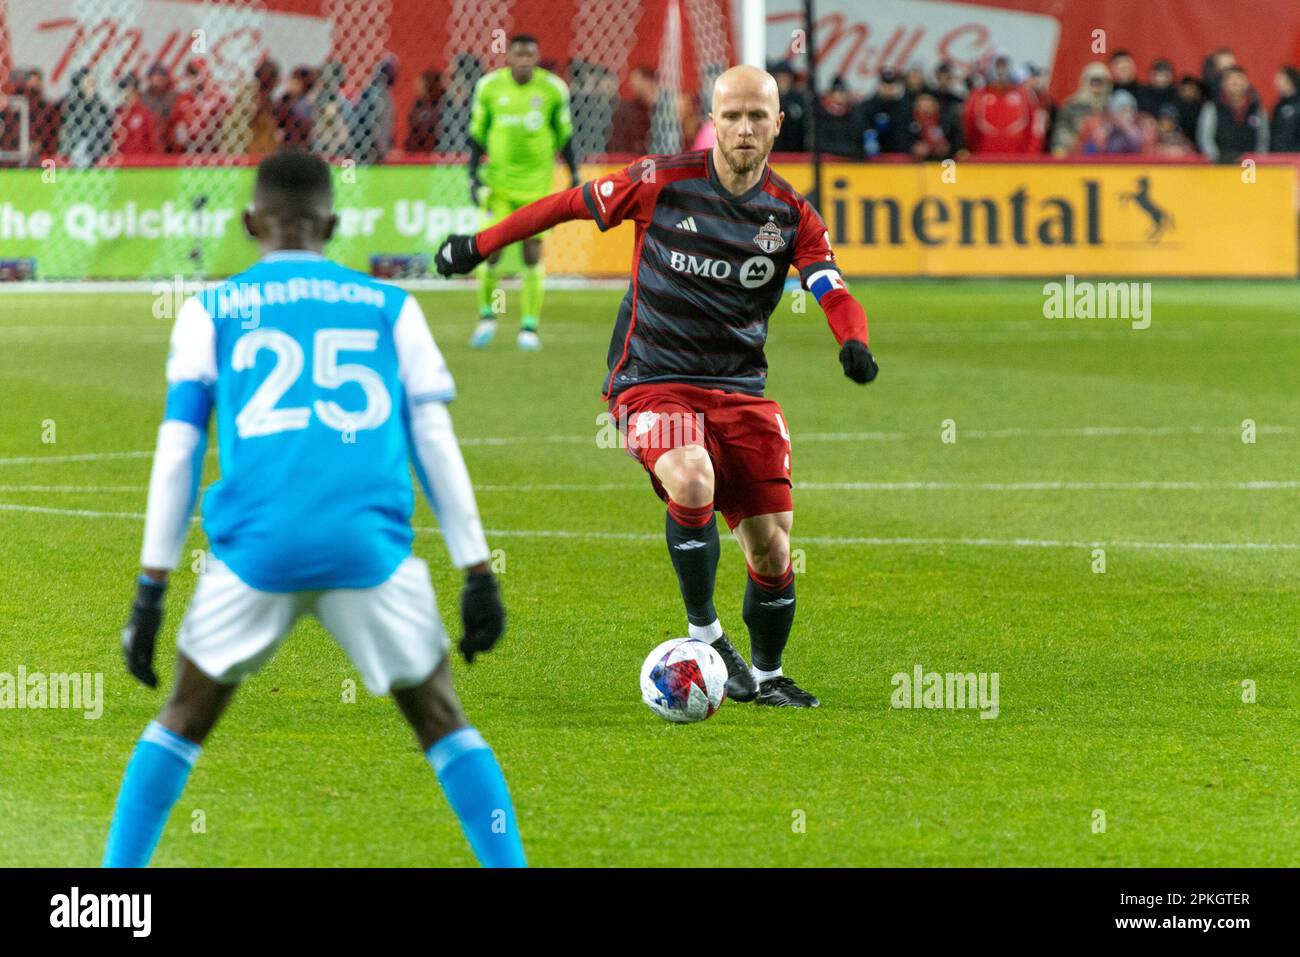 Toronto, ON, Canada - April 1: Michael Bradley #4 midfielder of the Toronto FC moves with the ball during the 2023 MLS Regular Season match between To Stock Photo